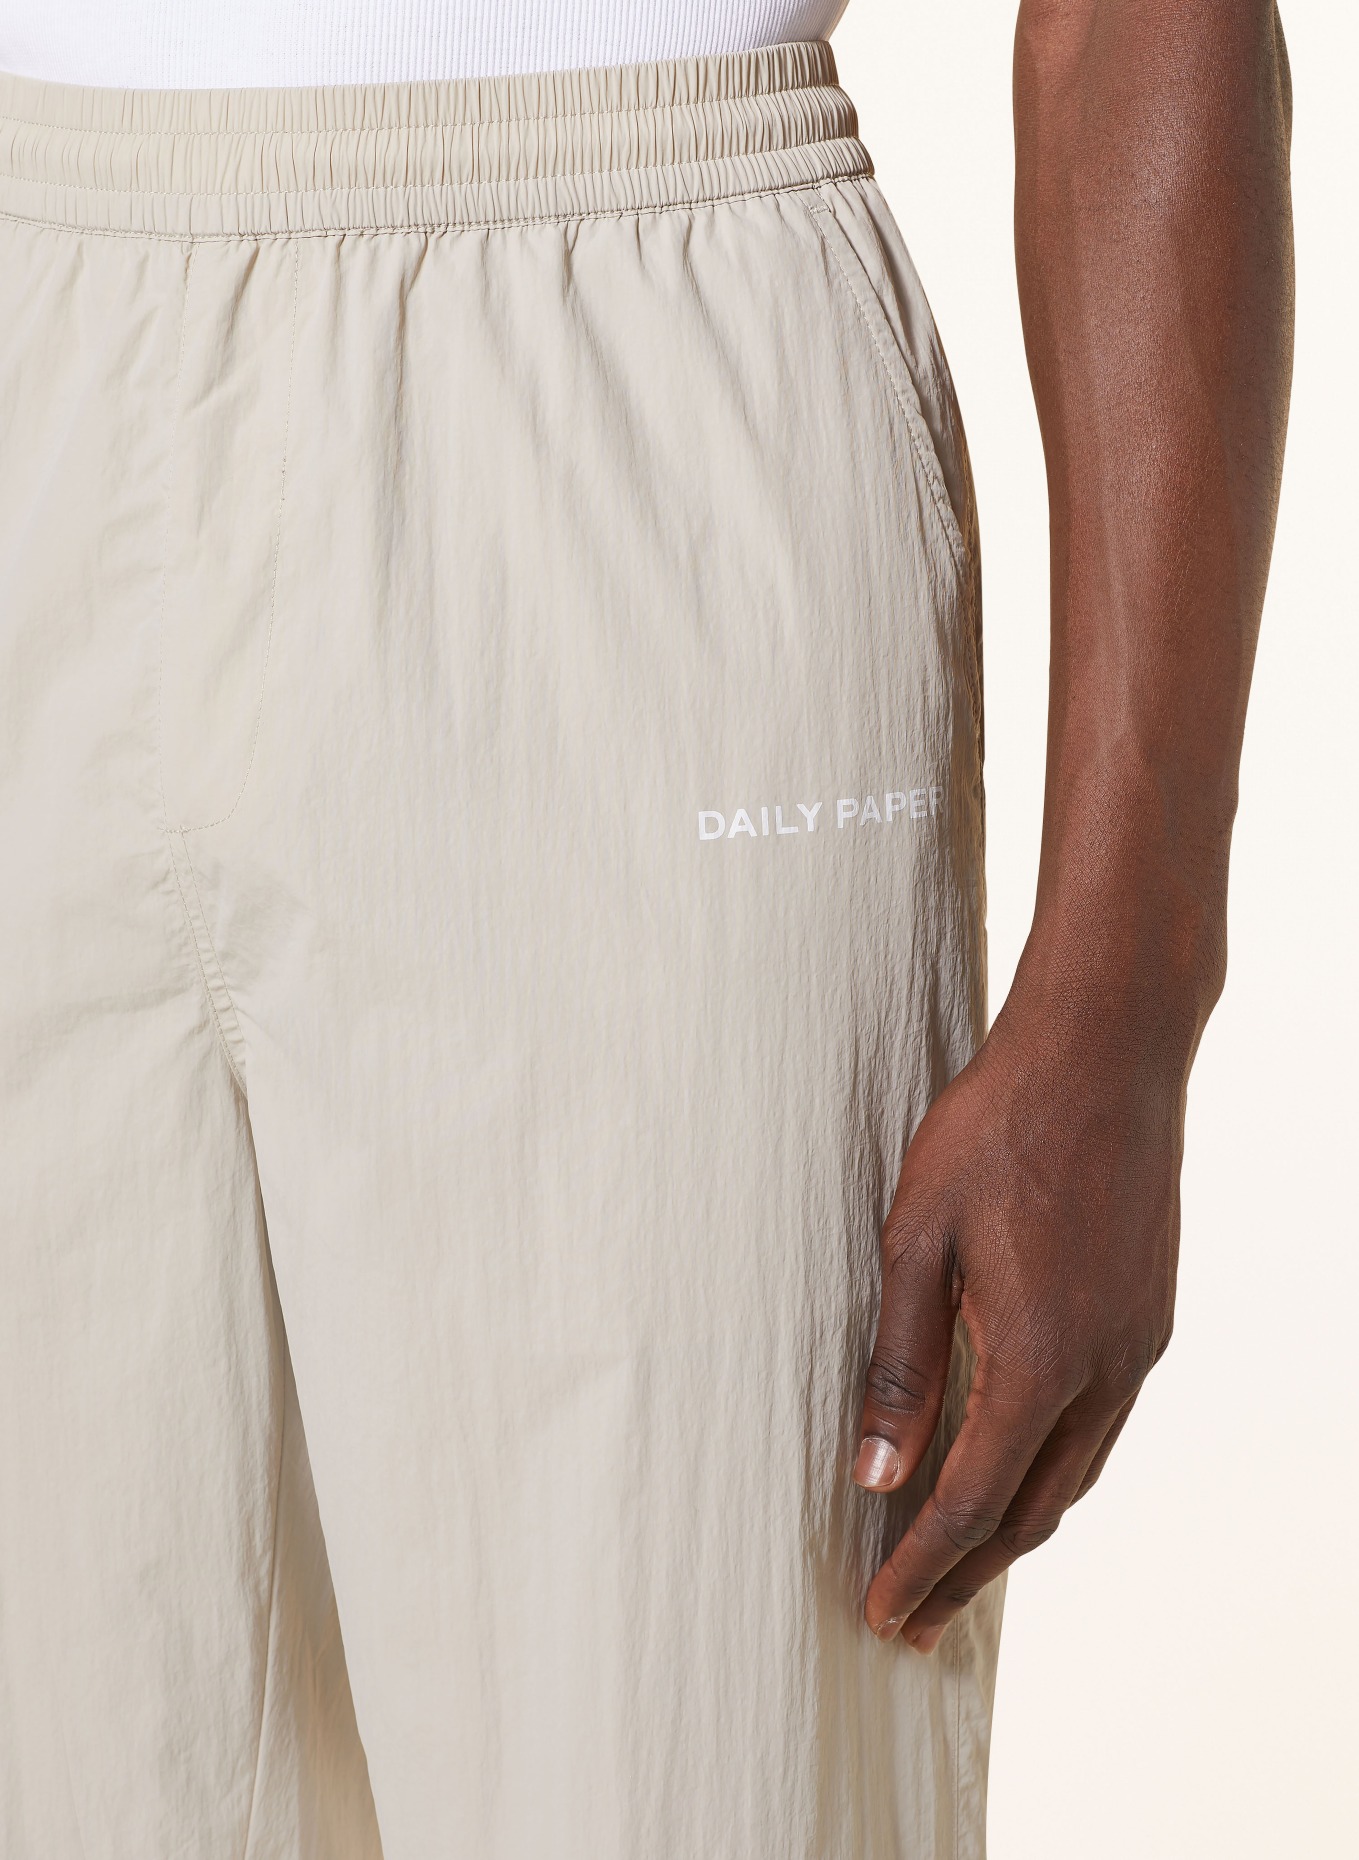 DAILY PAPER Pants EWARD in jogger style, Color: BEIGE (Image 5)